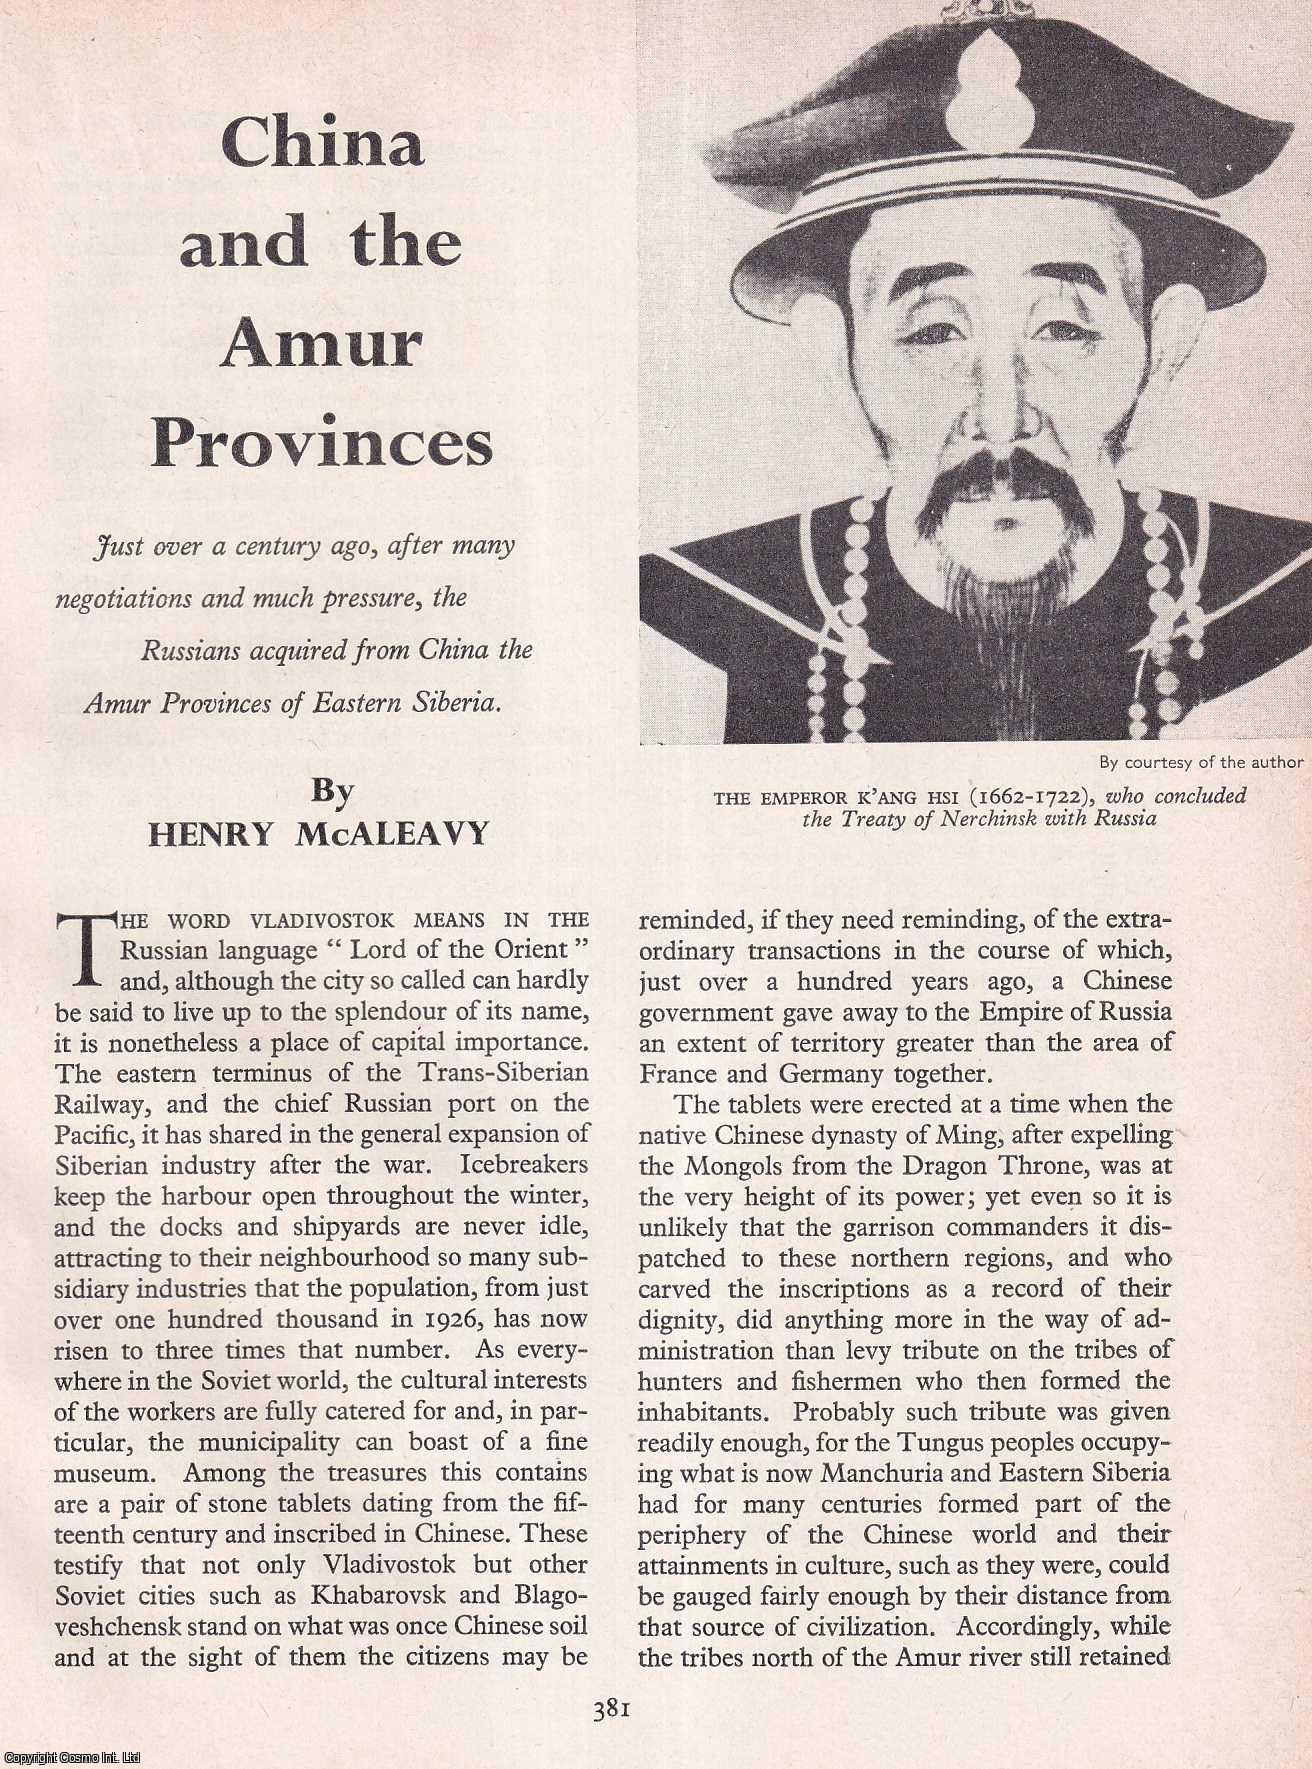 Henry McAleavy - China and The Amur Provinces. An original article from History Today magazine, 1964.